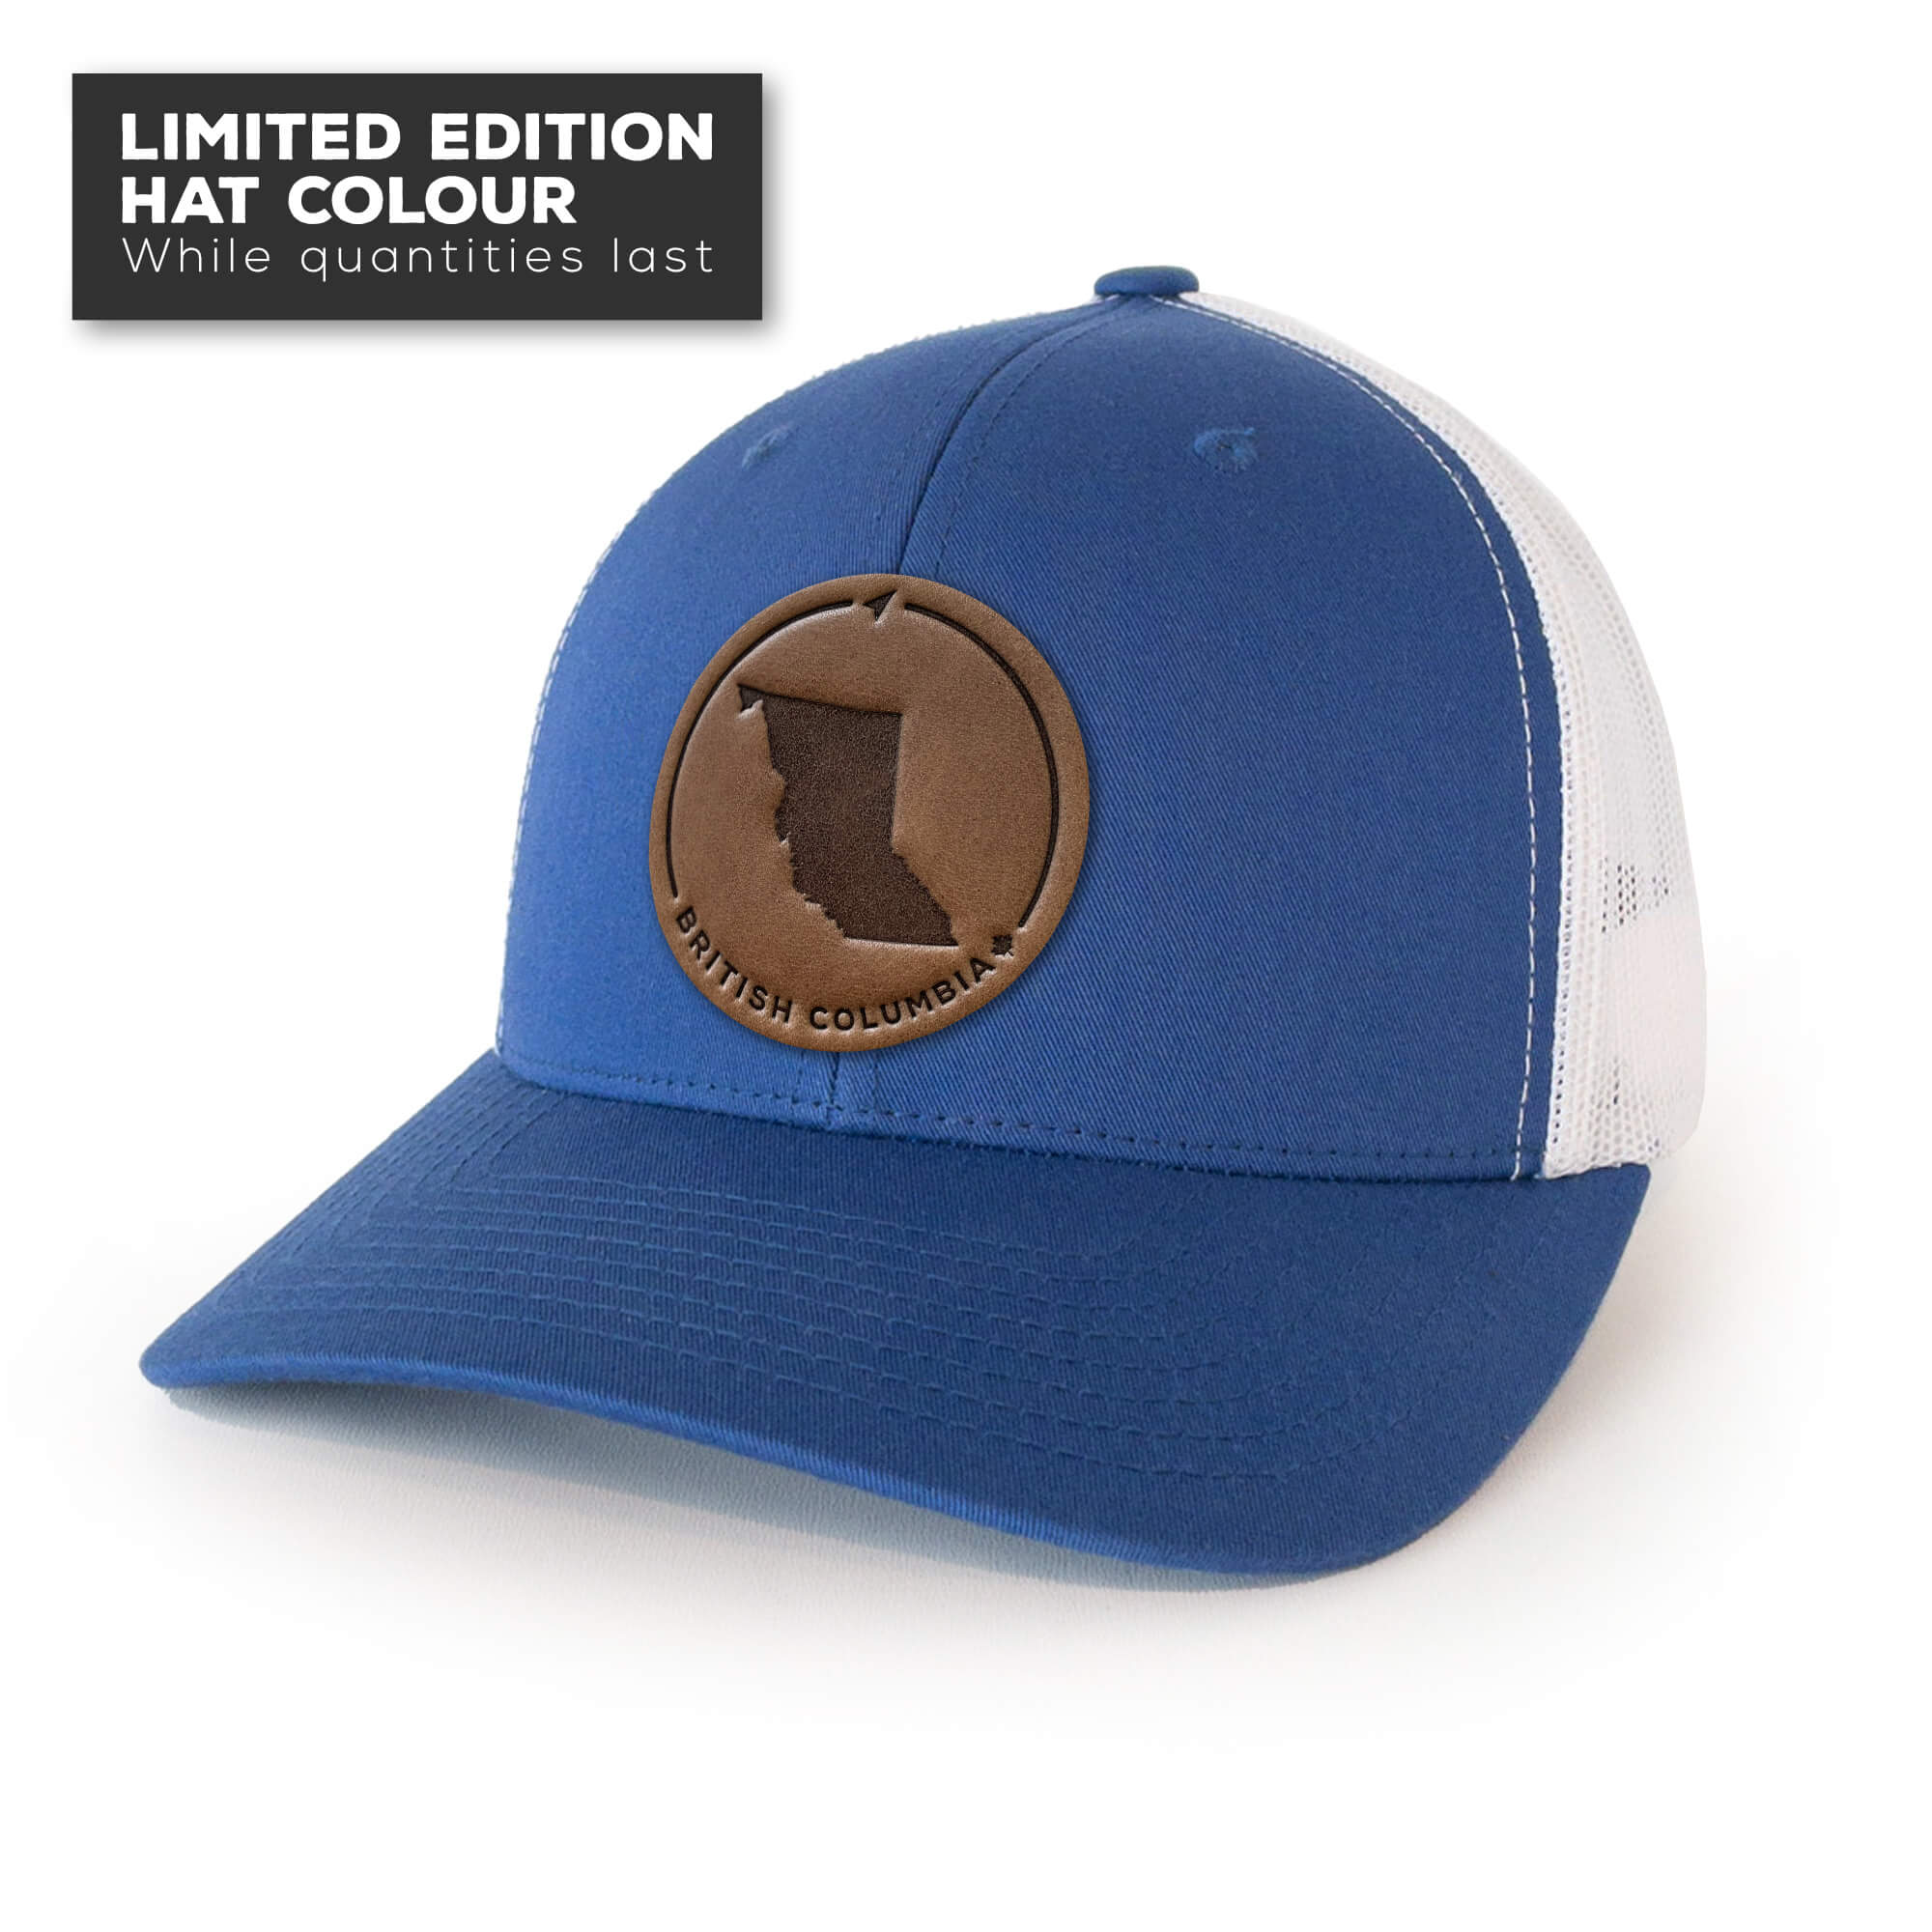 Royal Blue trucker hat with full-grain leather patch of British Columbia